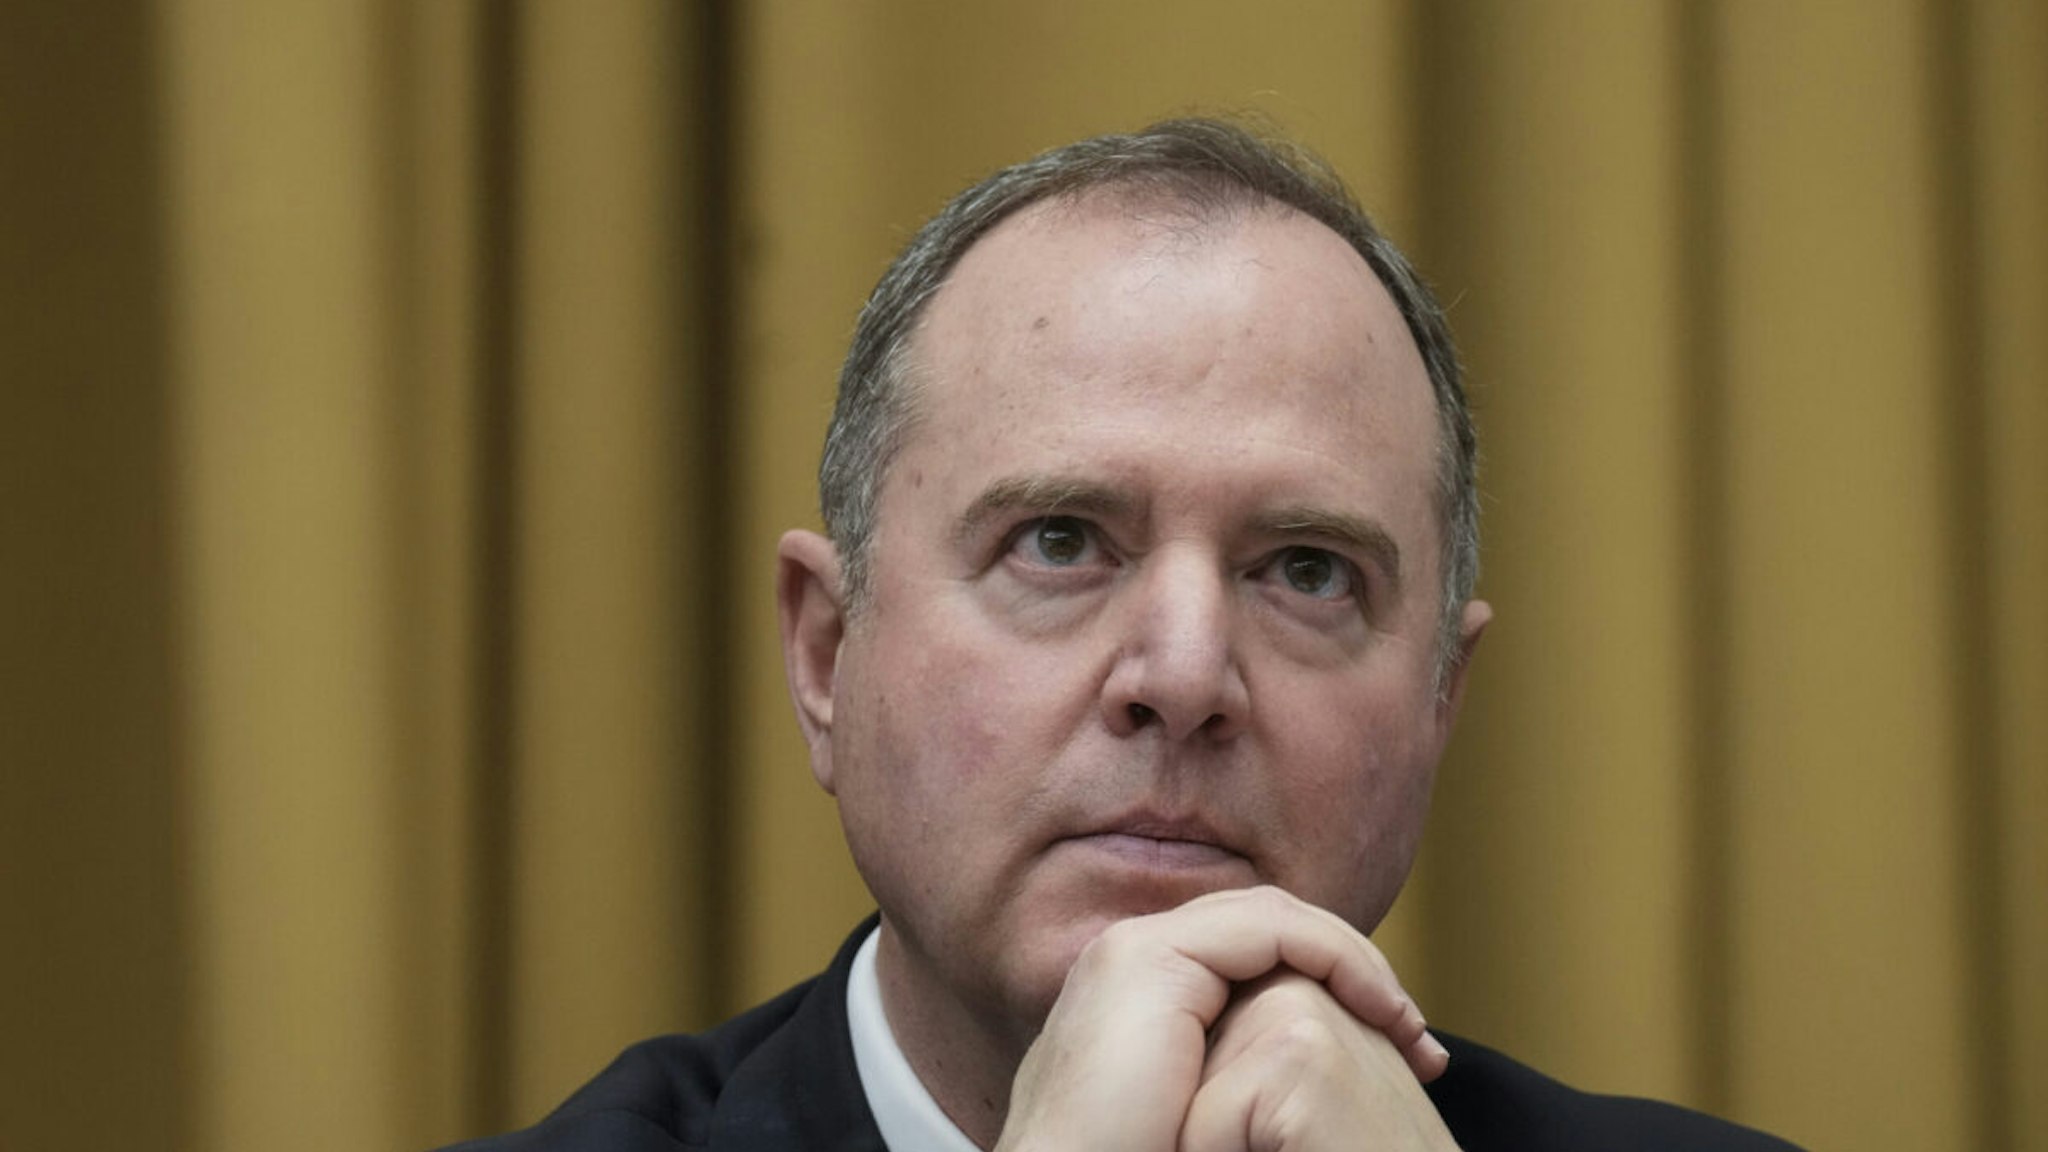 U.S. Rep. Adam Schiff (D-CA) attends a business meeting prior to a hearing on U.S. southern border security on Capitol Hill, February 01, 2023 in Washington, DC.